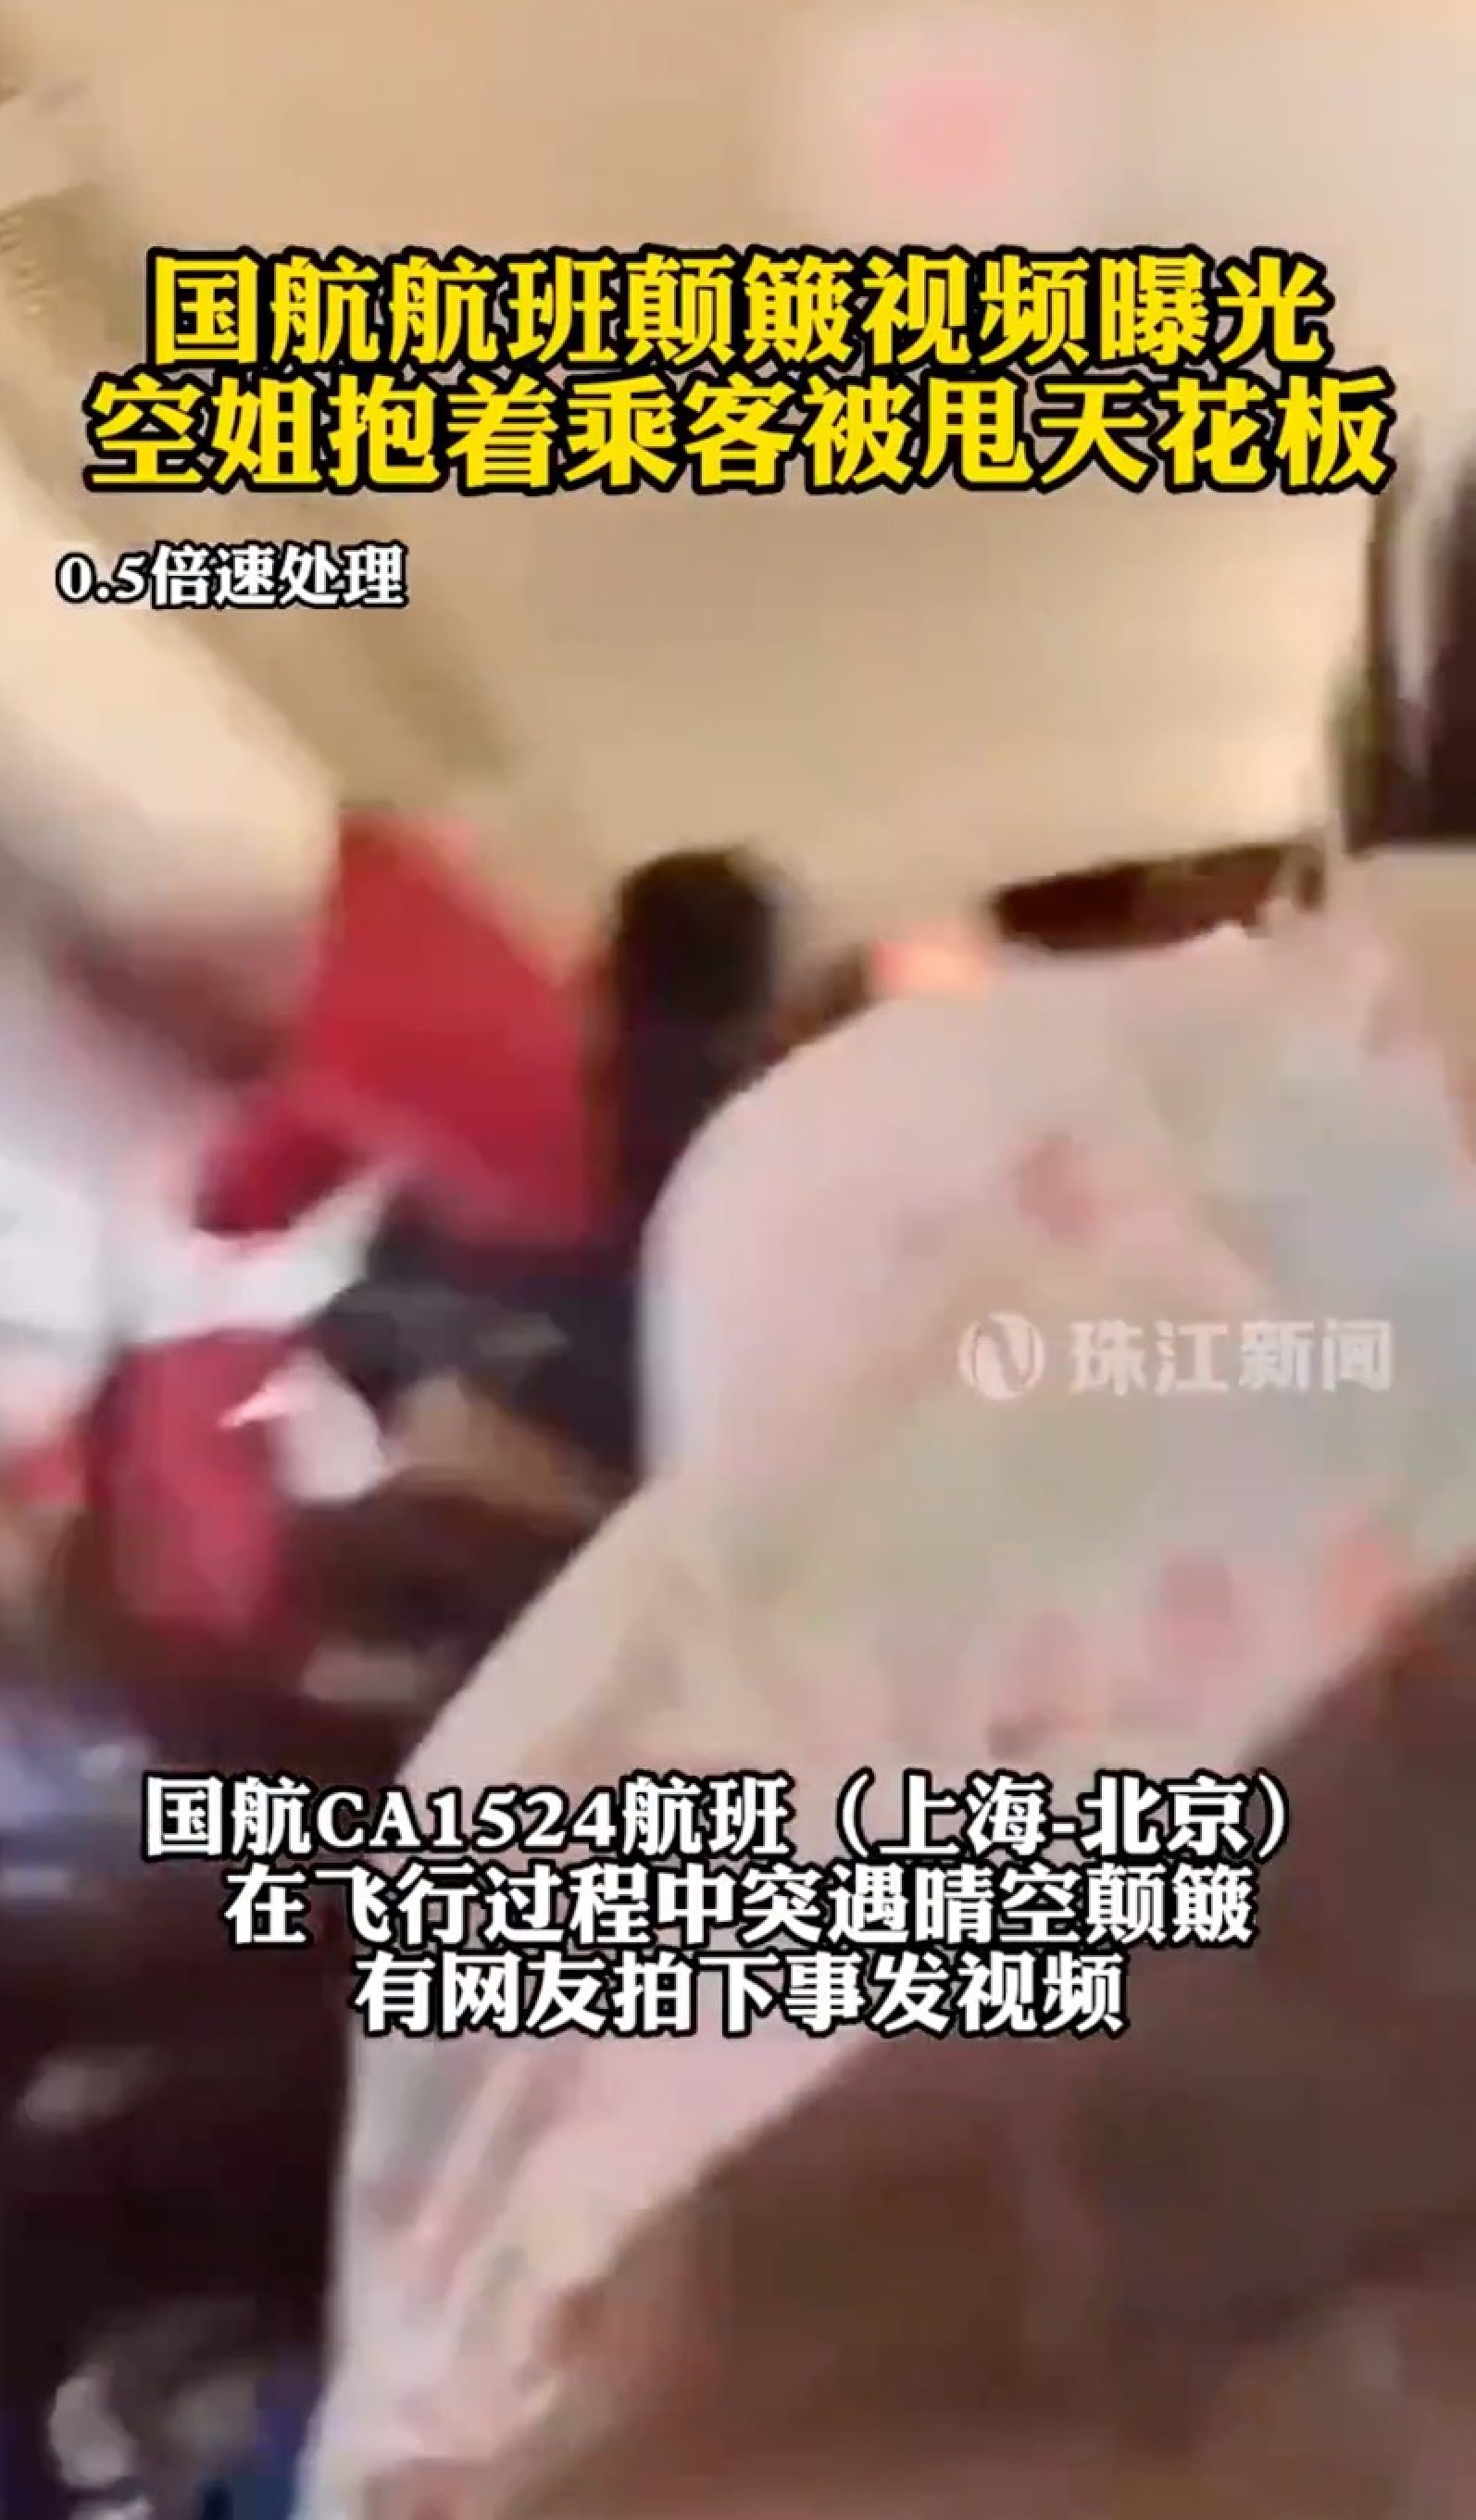 Turbulence sent the A330 aircraft into a dramatic plunge which sent pillows and passengers flying. Photo: Weibo